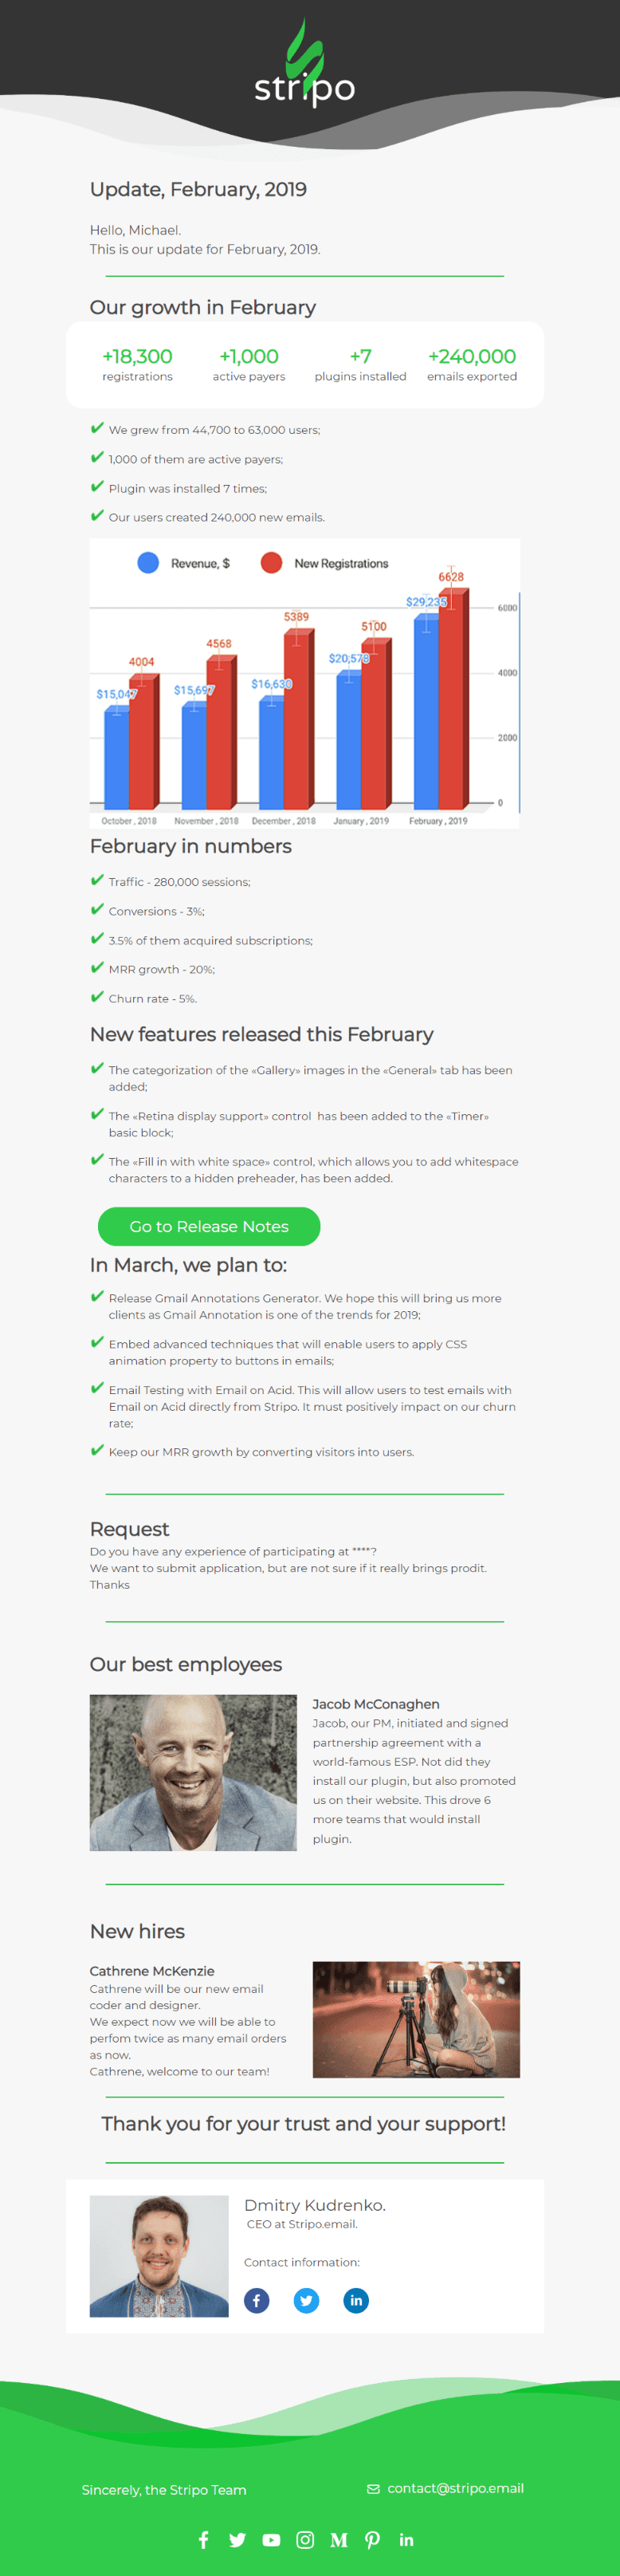 Stripo Investor Monthly Update Email Template by Stripo